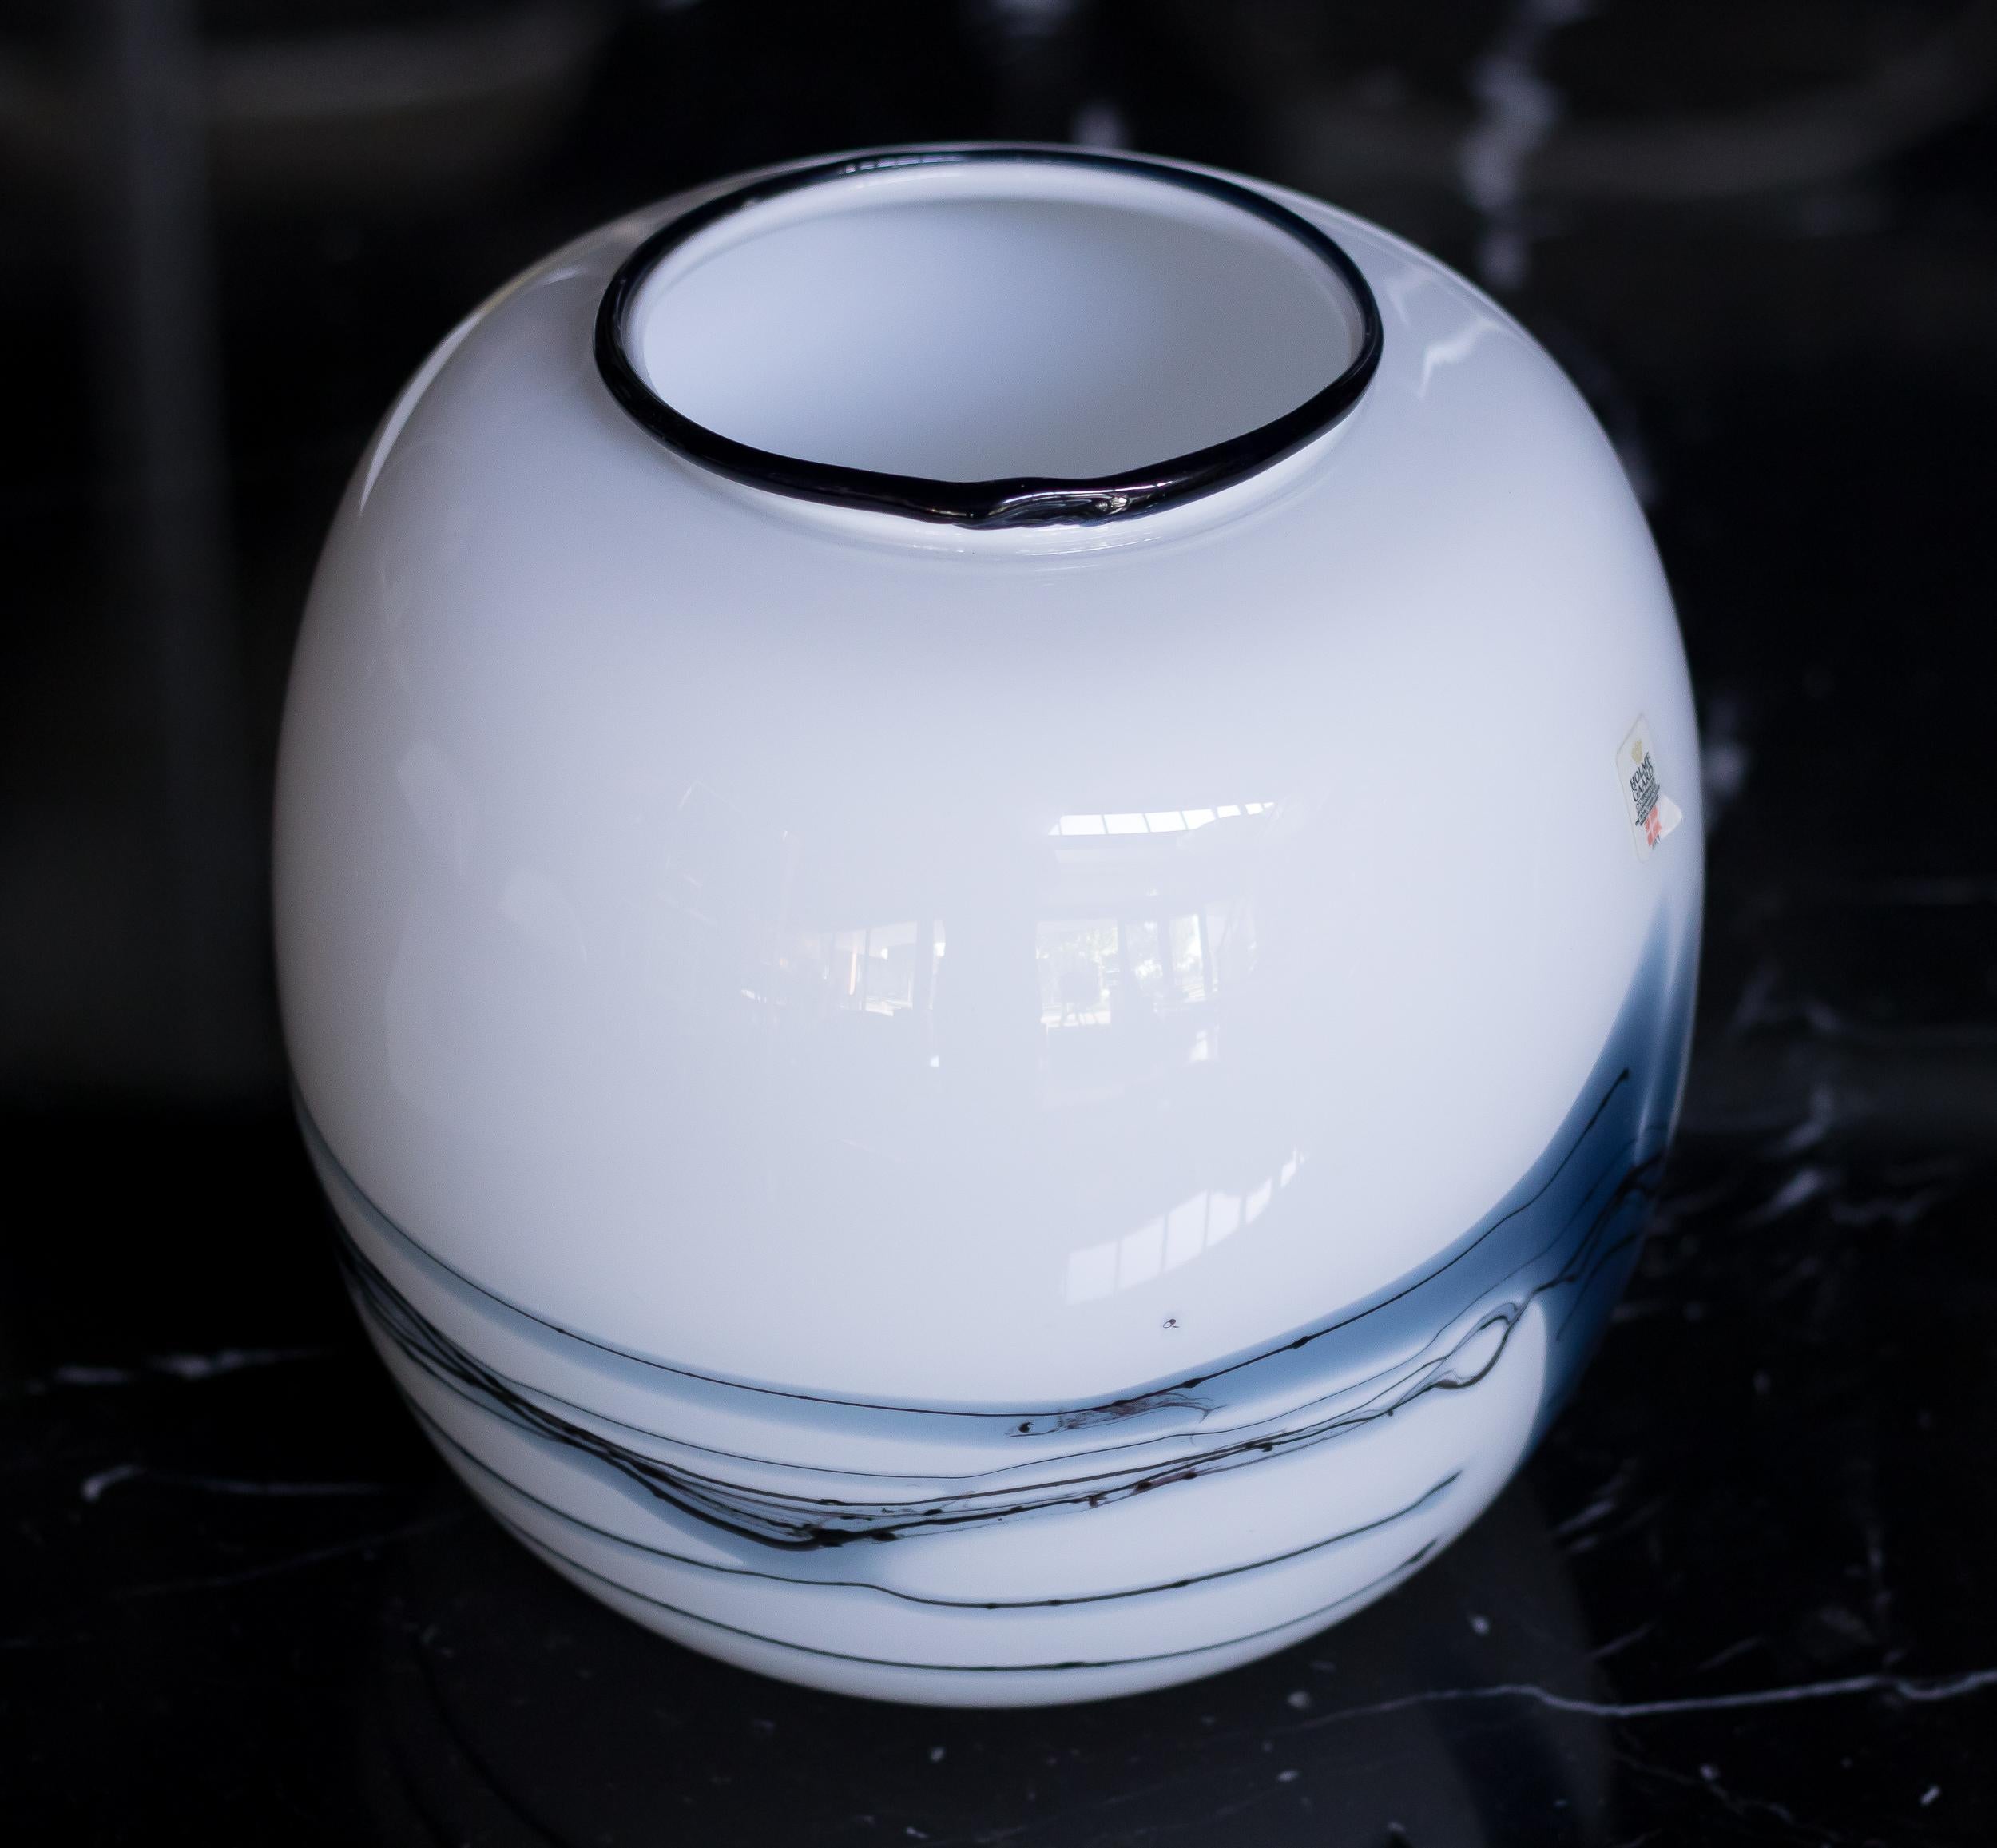 Round vase designed by Michael Bang for Holmegaard, Copenhagen. 
From the Atlantis series made in 1981. 
White, black and blue glass. Original Holmegaard sticker.
No chips or scratches.

Michael Bang is a renowned Danish glass artist known for his